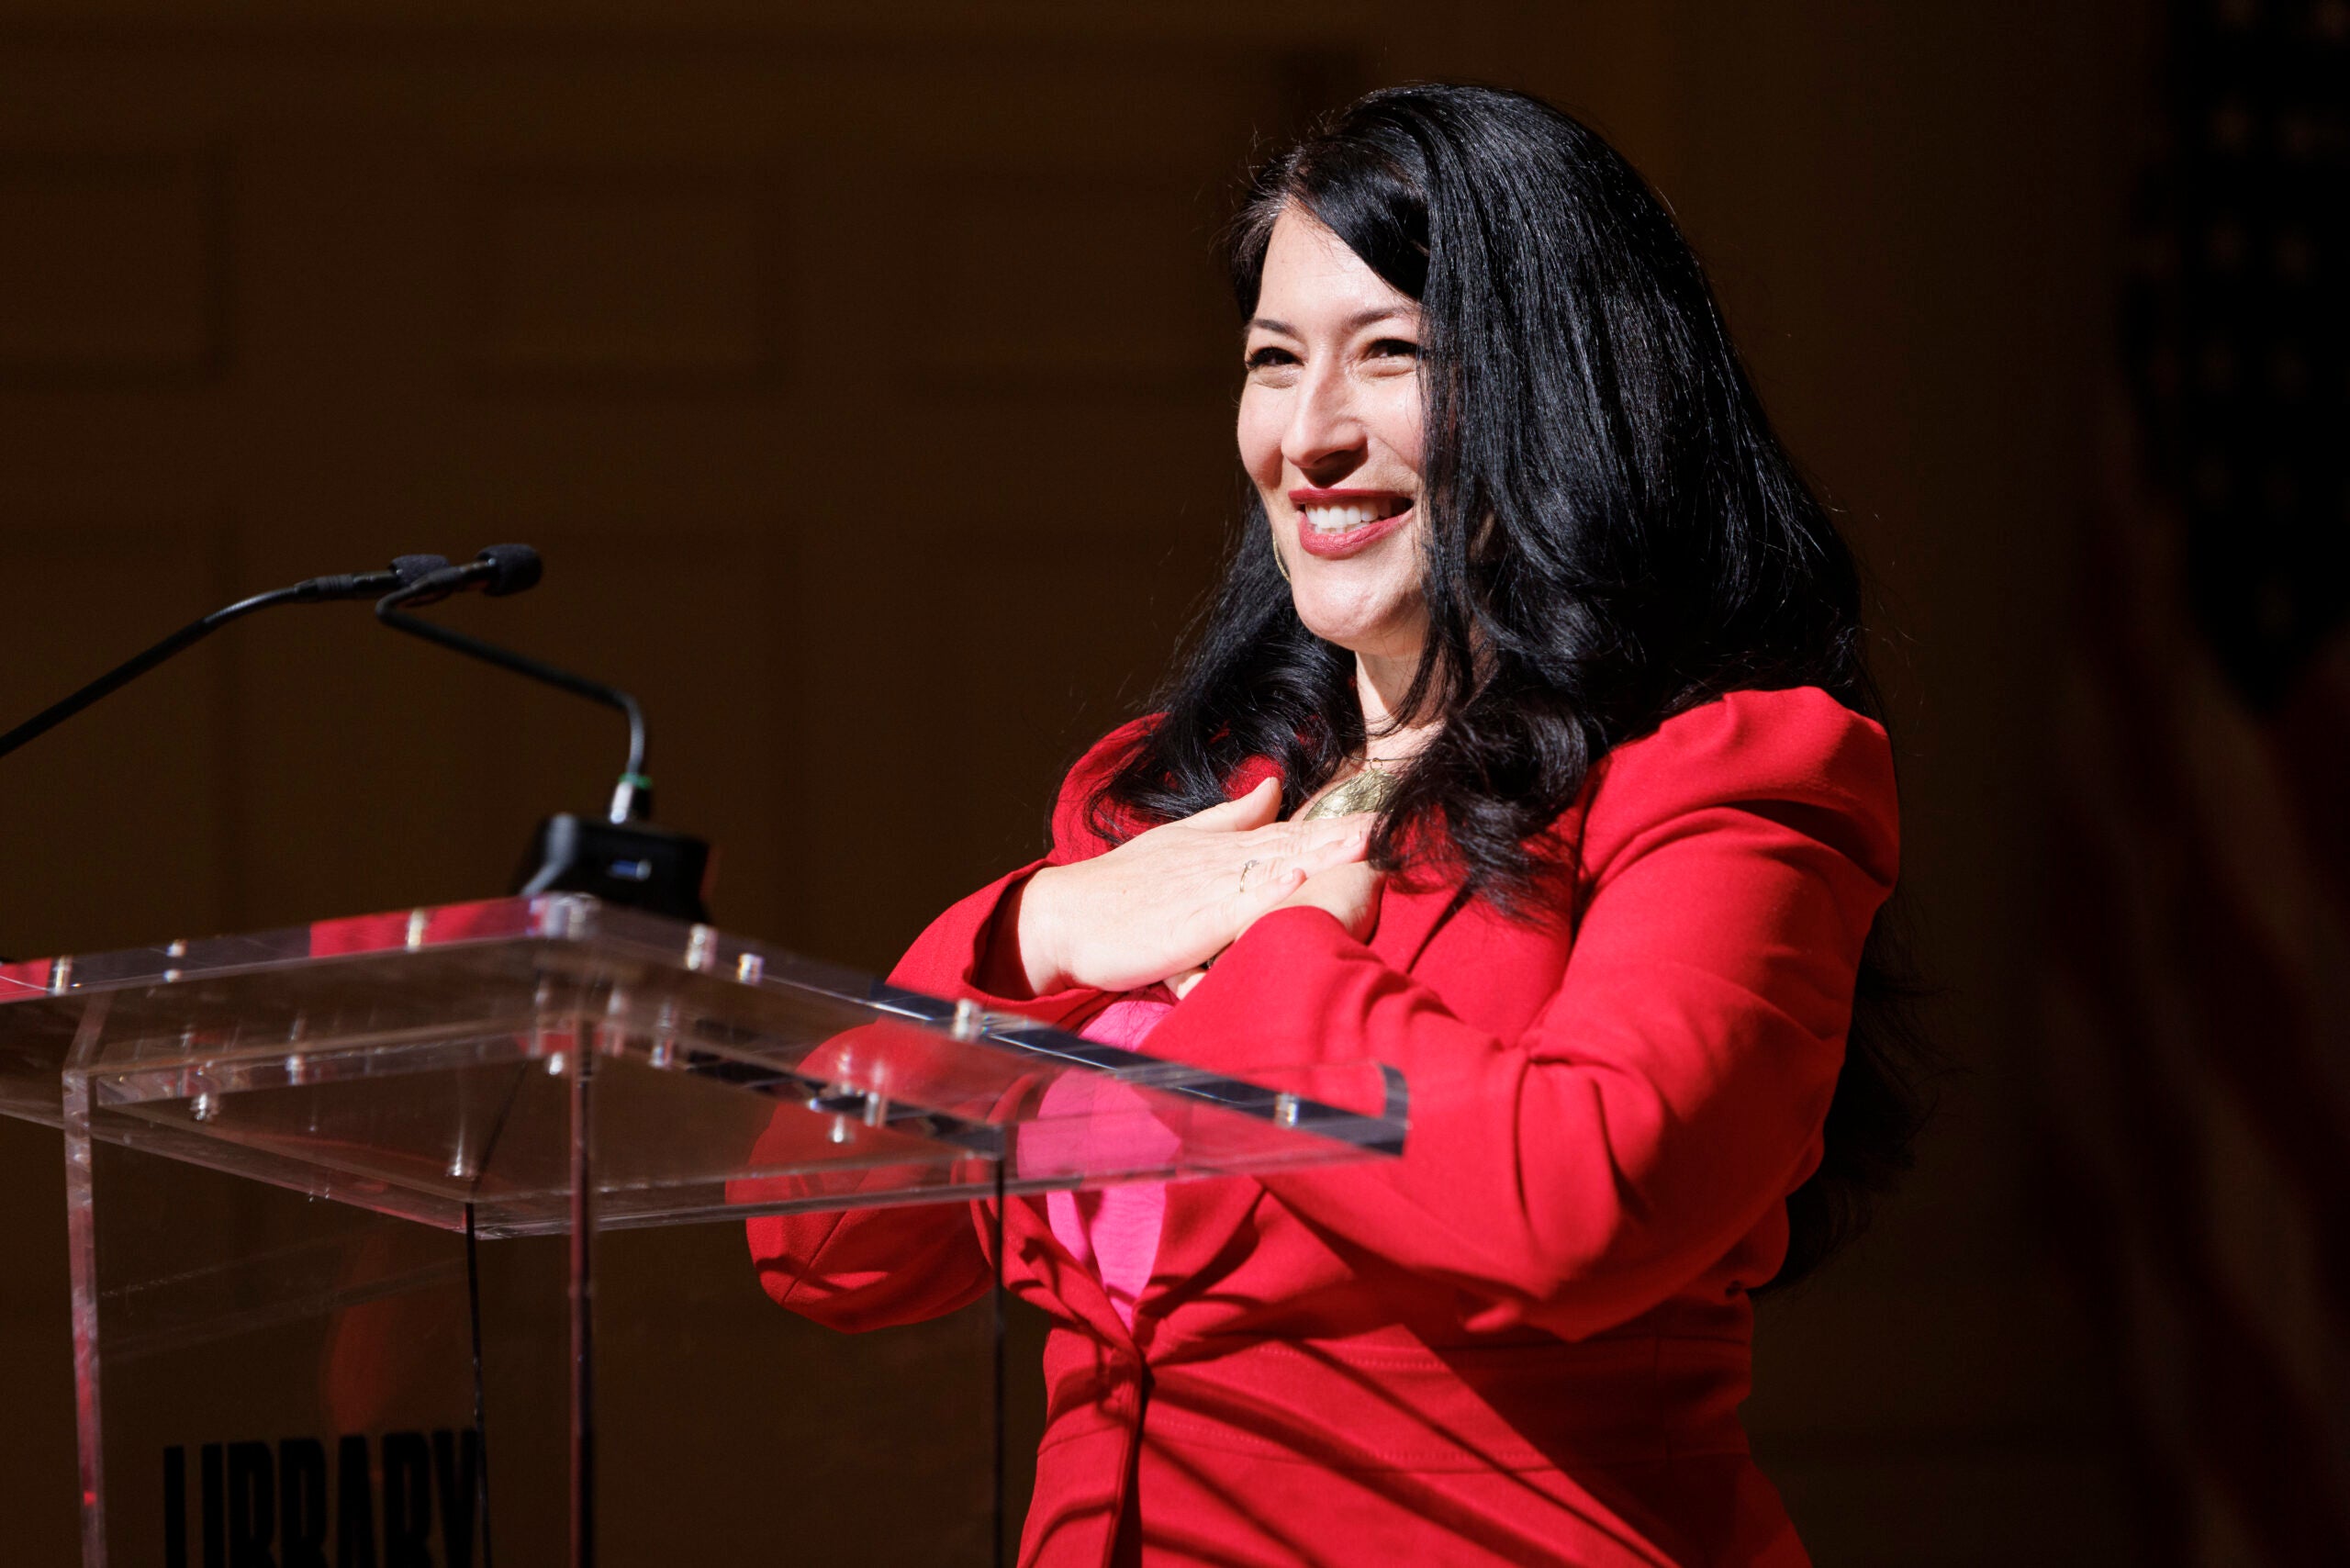 Ada Limón, the 24th U.S. Poet Laureate Consultant in Poetry, delivers her opening reading at the Library of Congress, September 29, 2022. Photo by Shawn Miller/Library of Congress.